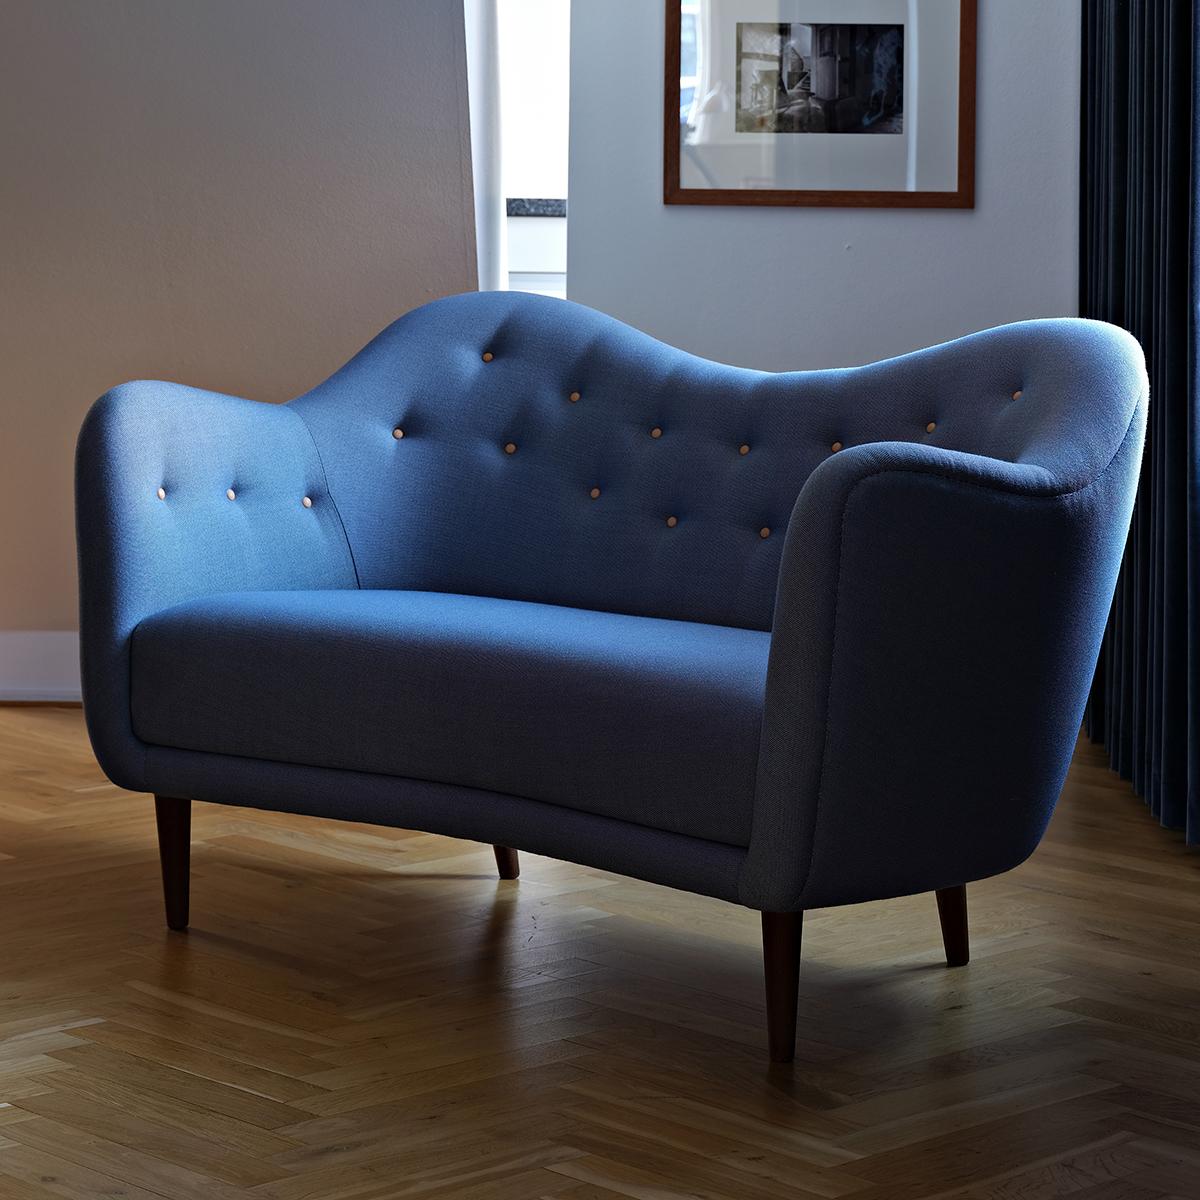 Sofa designed by Finn Juhl in 1946, relaunched in 2008.
Manufactured by House of Finn Juhl in Denmark.

As the name suggests, this sofa was designed in 1946. The sofa was manufactured by the upholsterer Carl Brørup in his workshop in